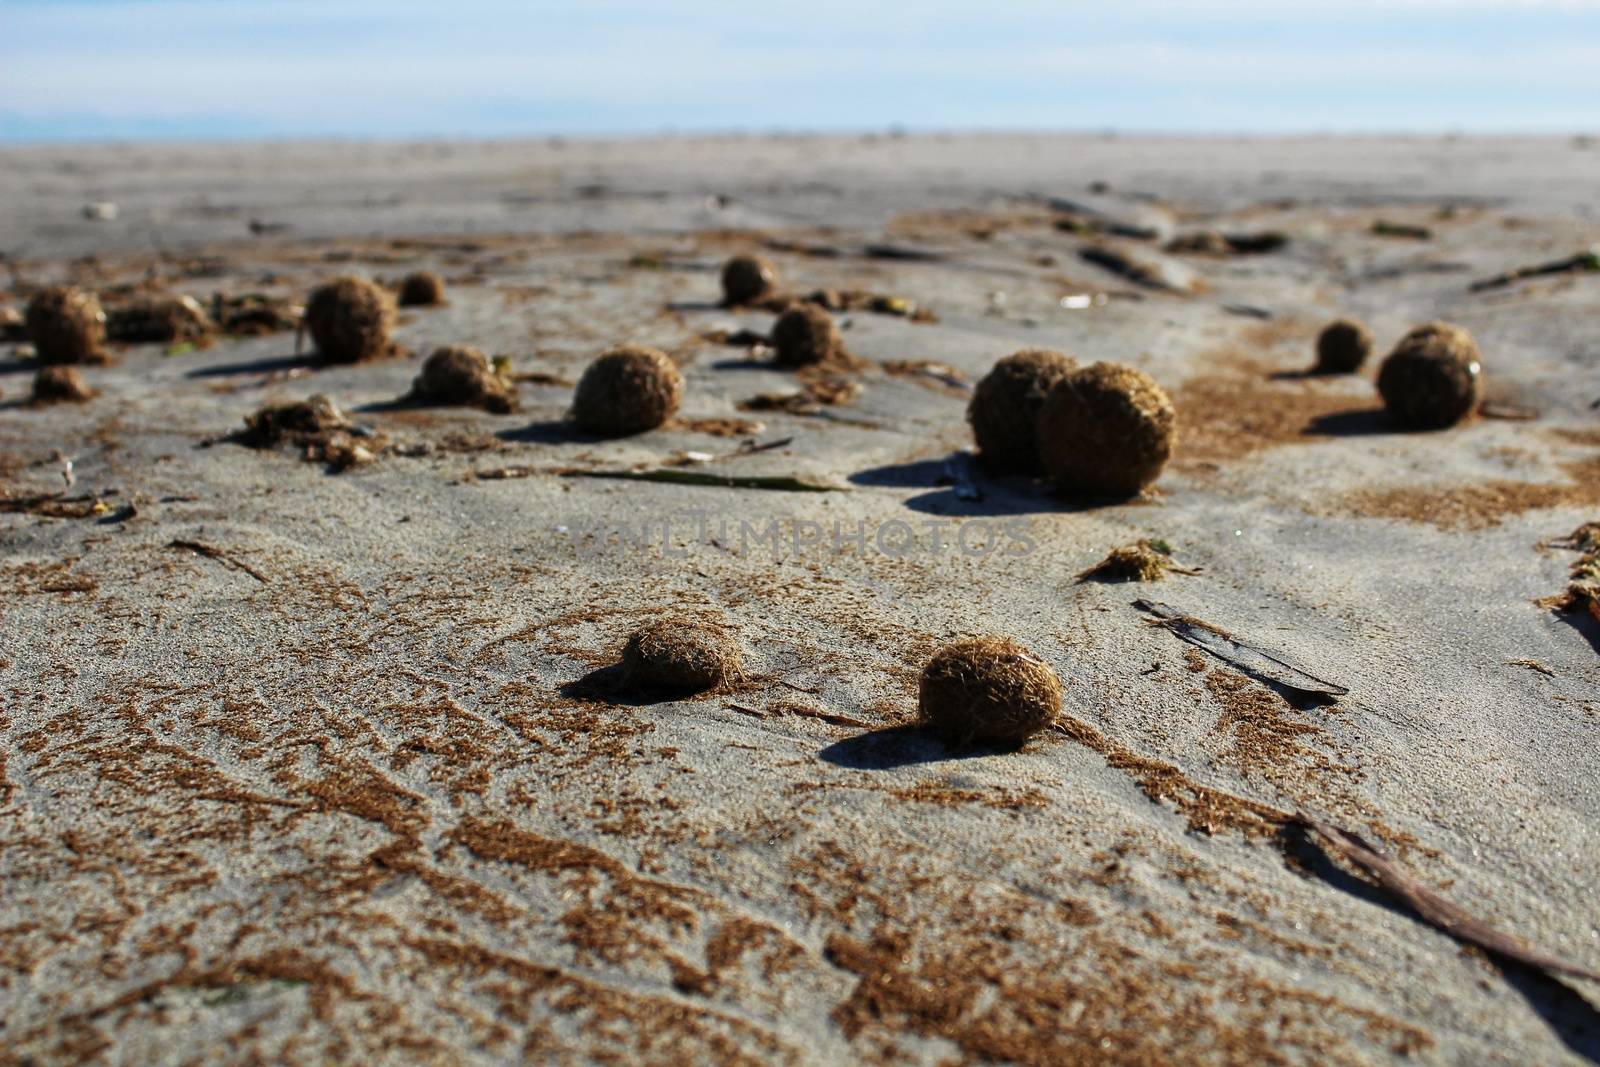 Dry oceanic posidonia seaweed balls on the beach and sand textur by soniabonet